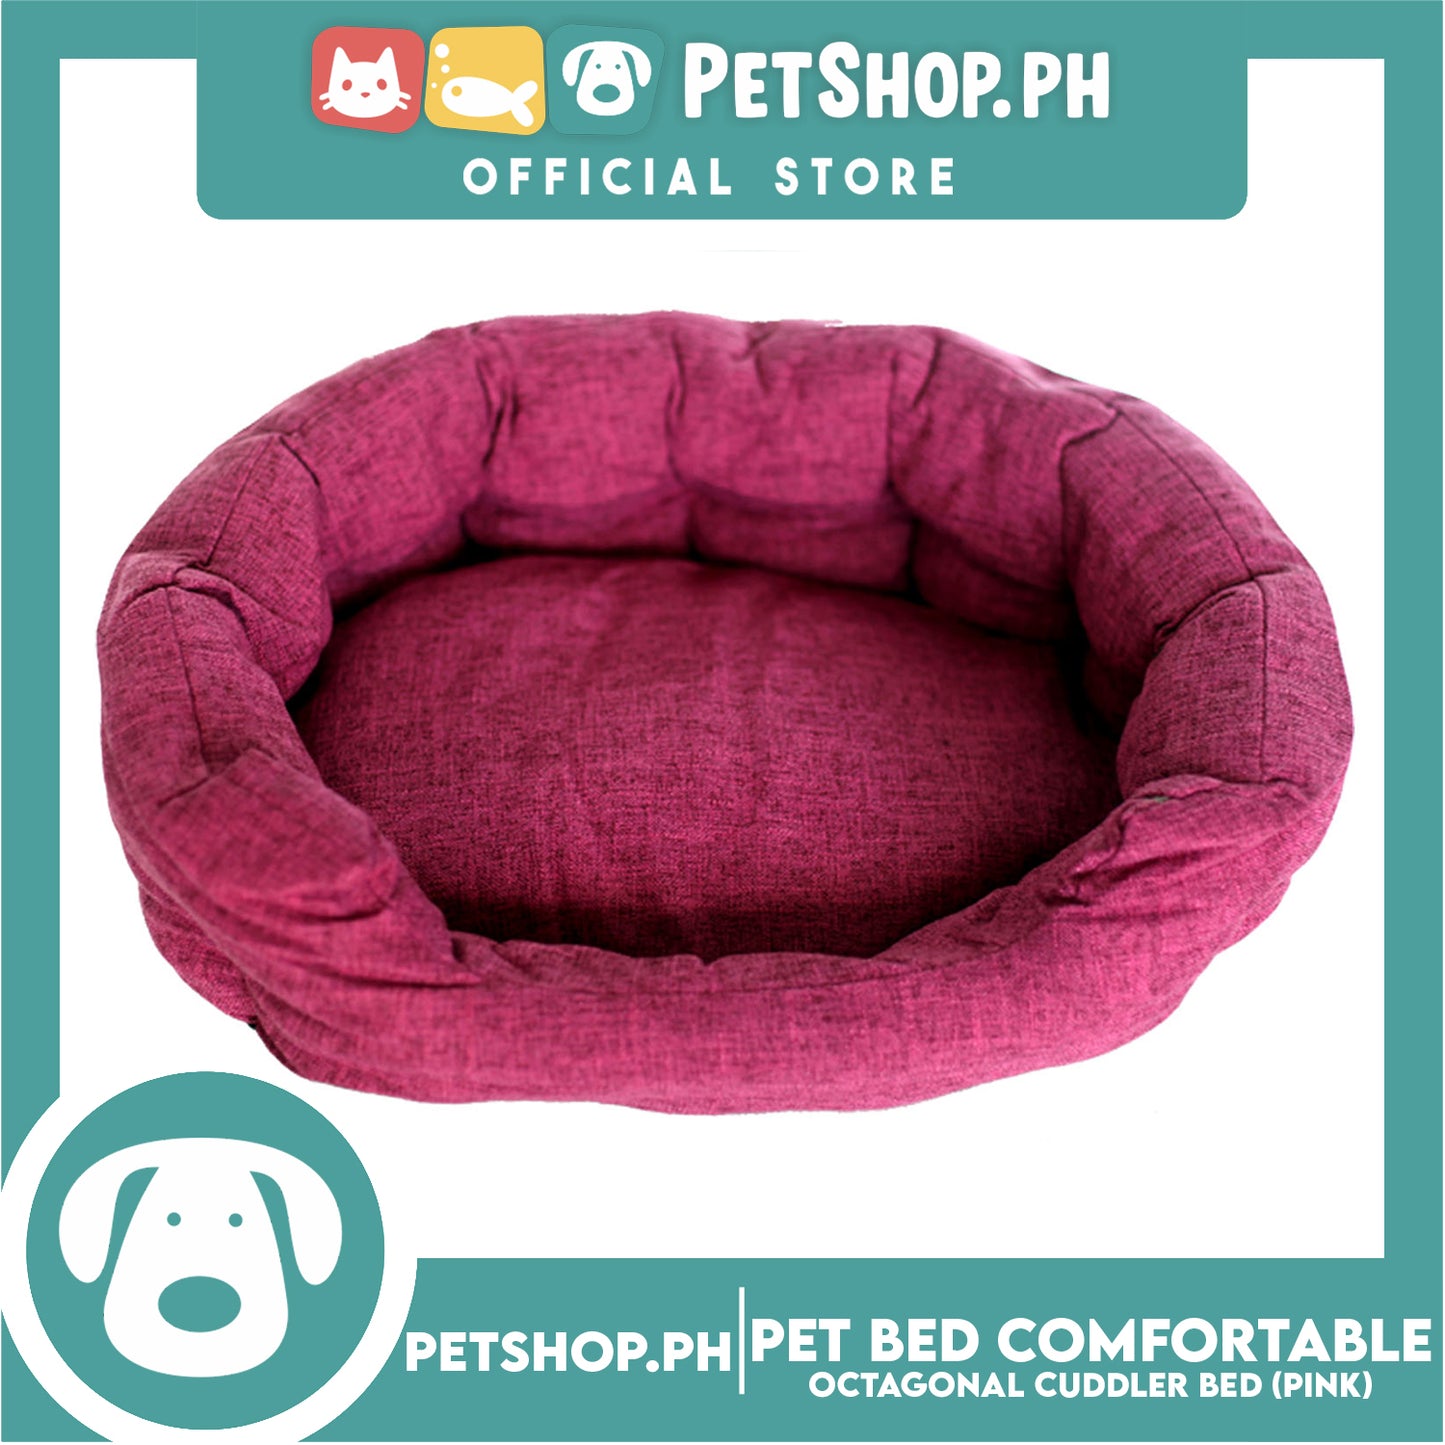 Pet Bed Comfortable Octagonal Cuddler Dog Bed 65x60x18cm Large for Dogs & Cats (Pink)